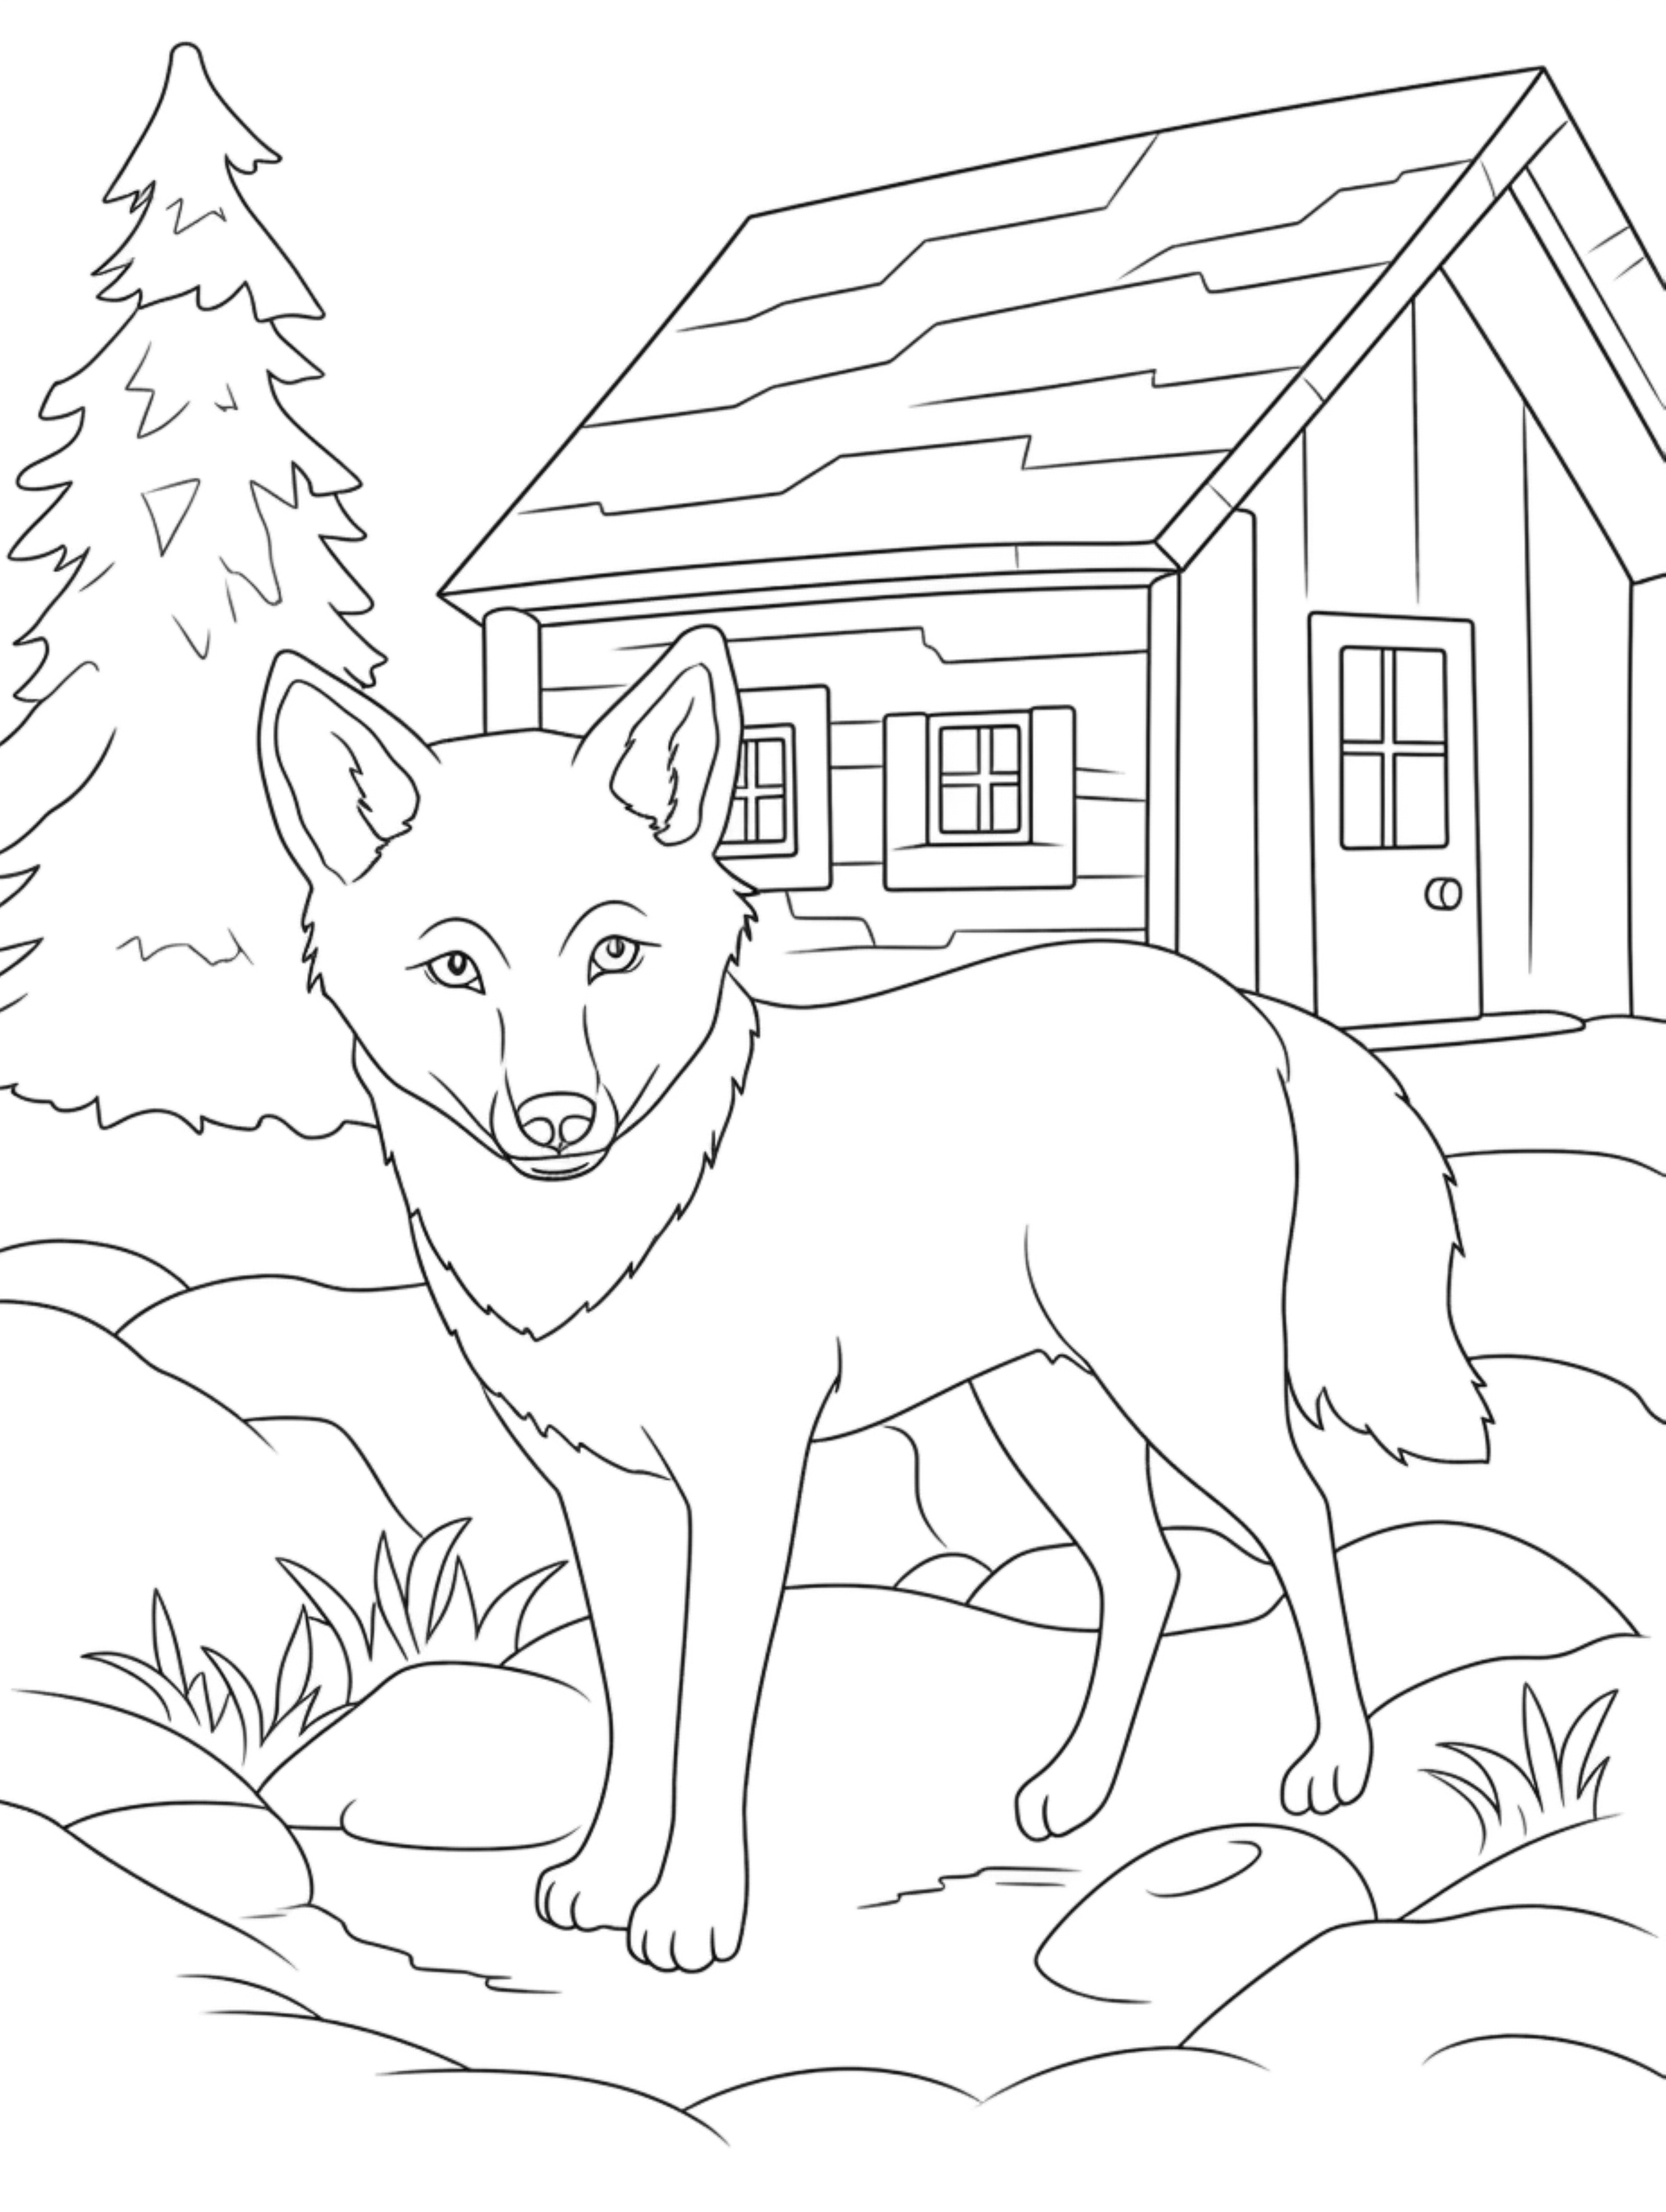 01 cute wolf in its habitat coloring page for kids c